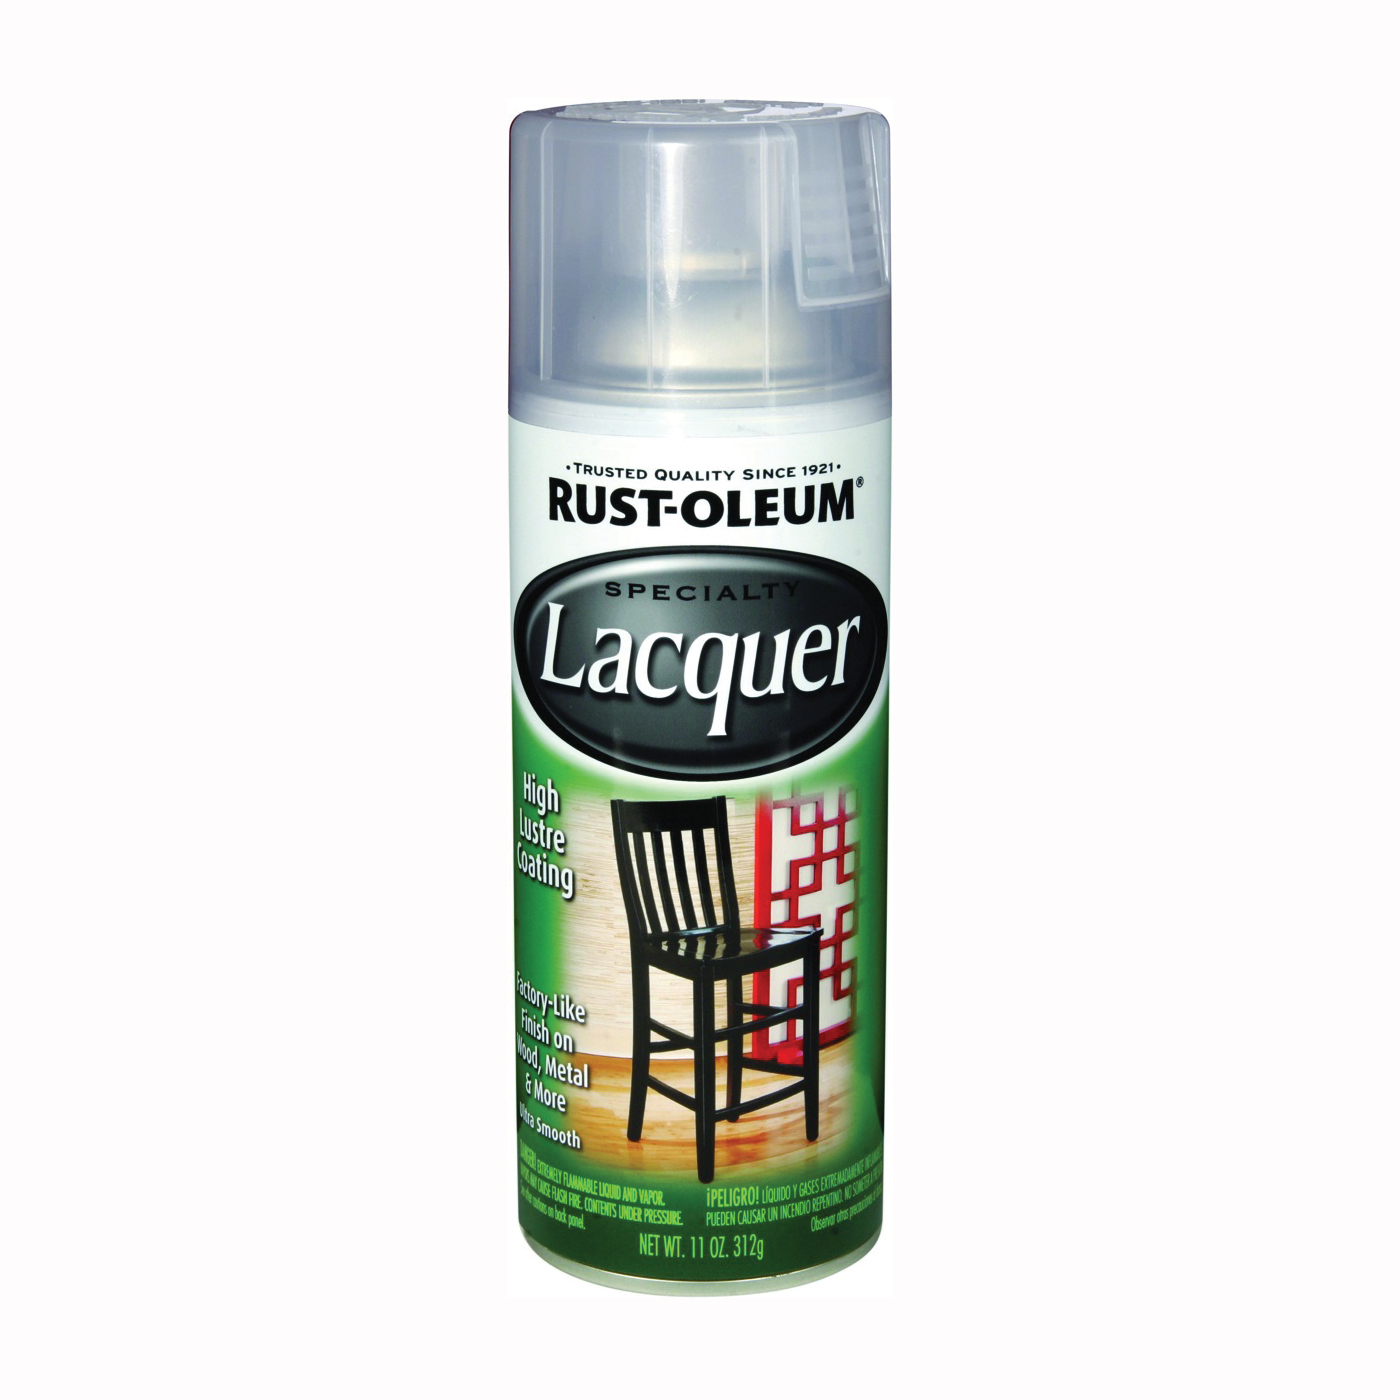 SPECIALTY 1906830 Lacquer Spray Paint, Gloss, Liquid, Clear, 11 oz, Aerosol Can